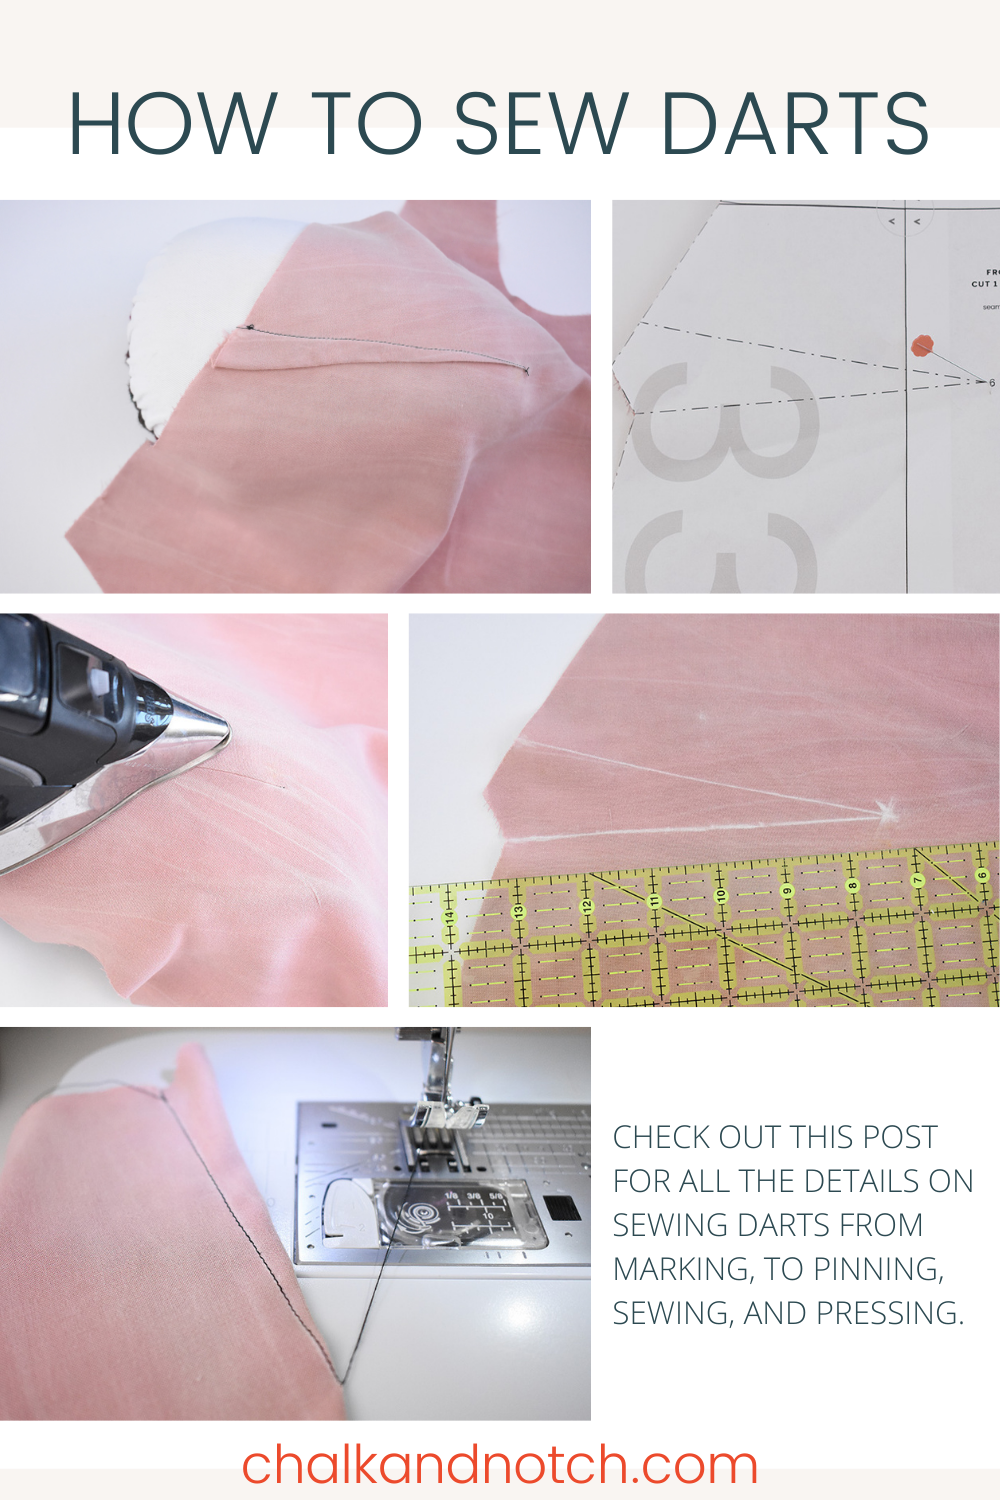 Sewing Tips | How to Sew Darts: A sewing tutorial featuring tips and tricks for marking, pinning, sewing and pressing darts in apparel sewing patterns.